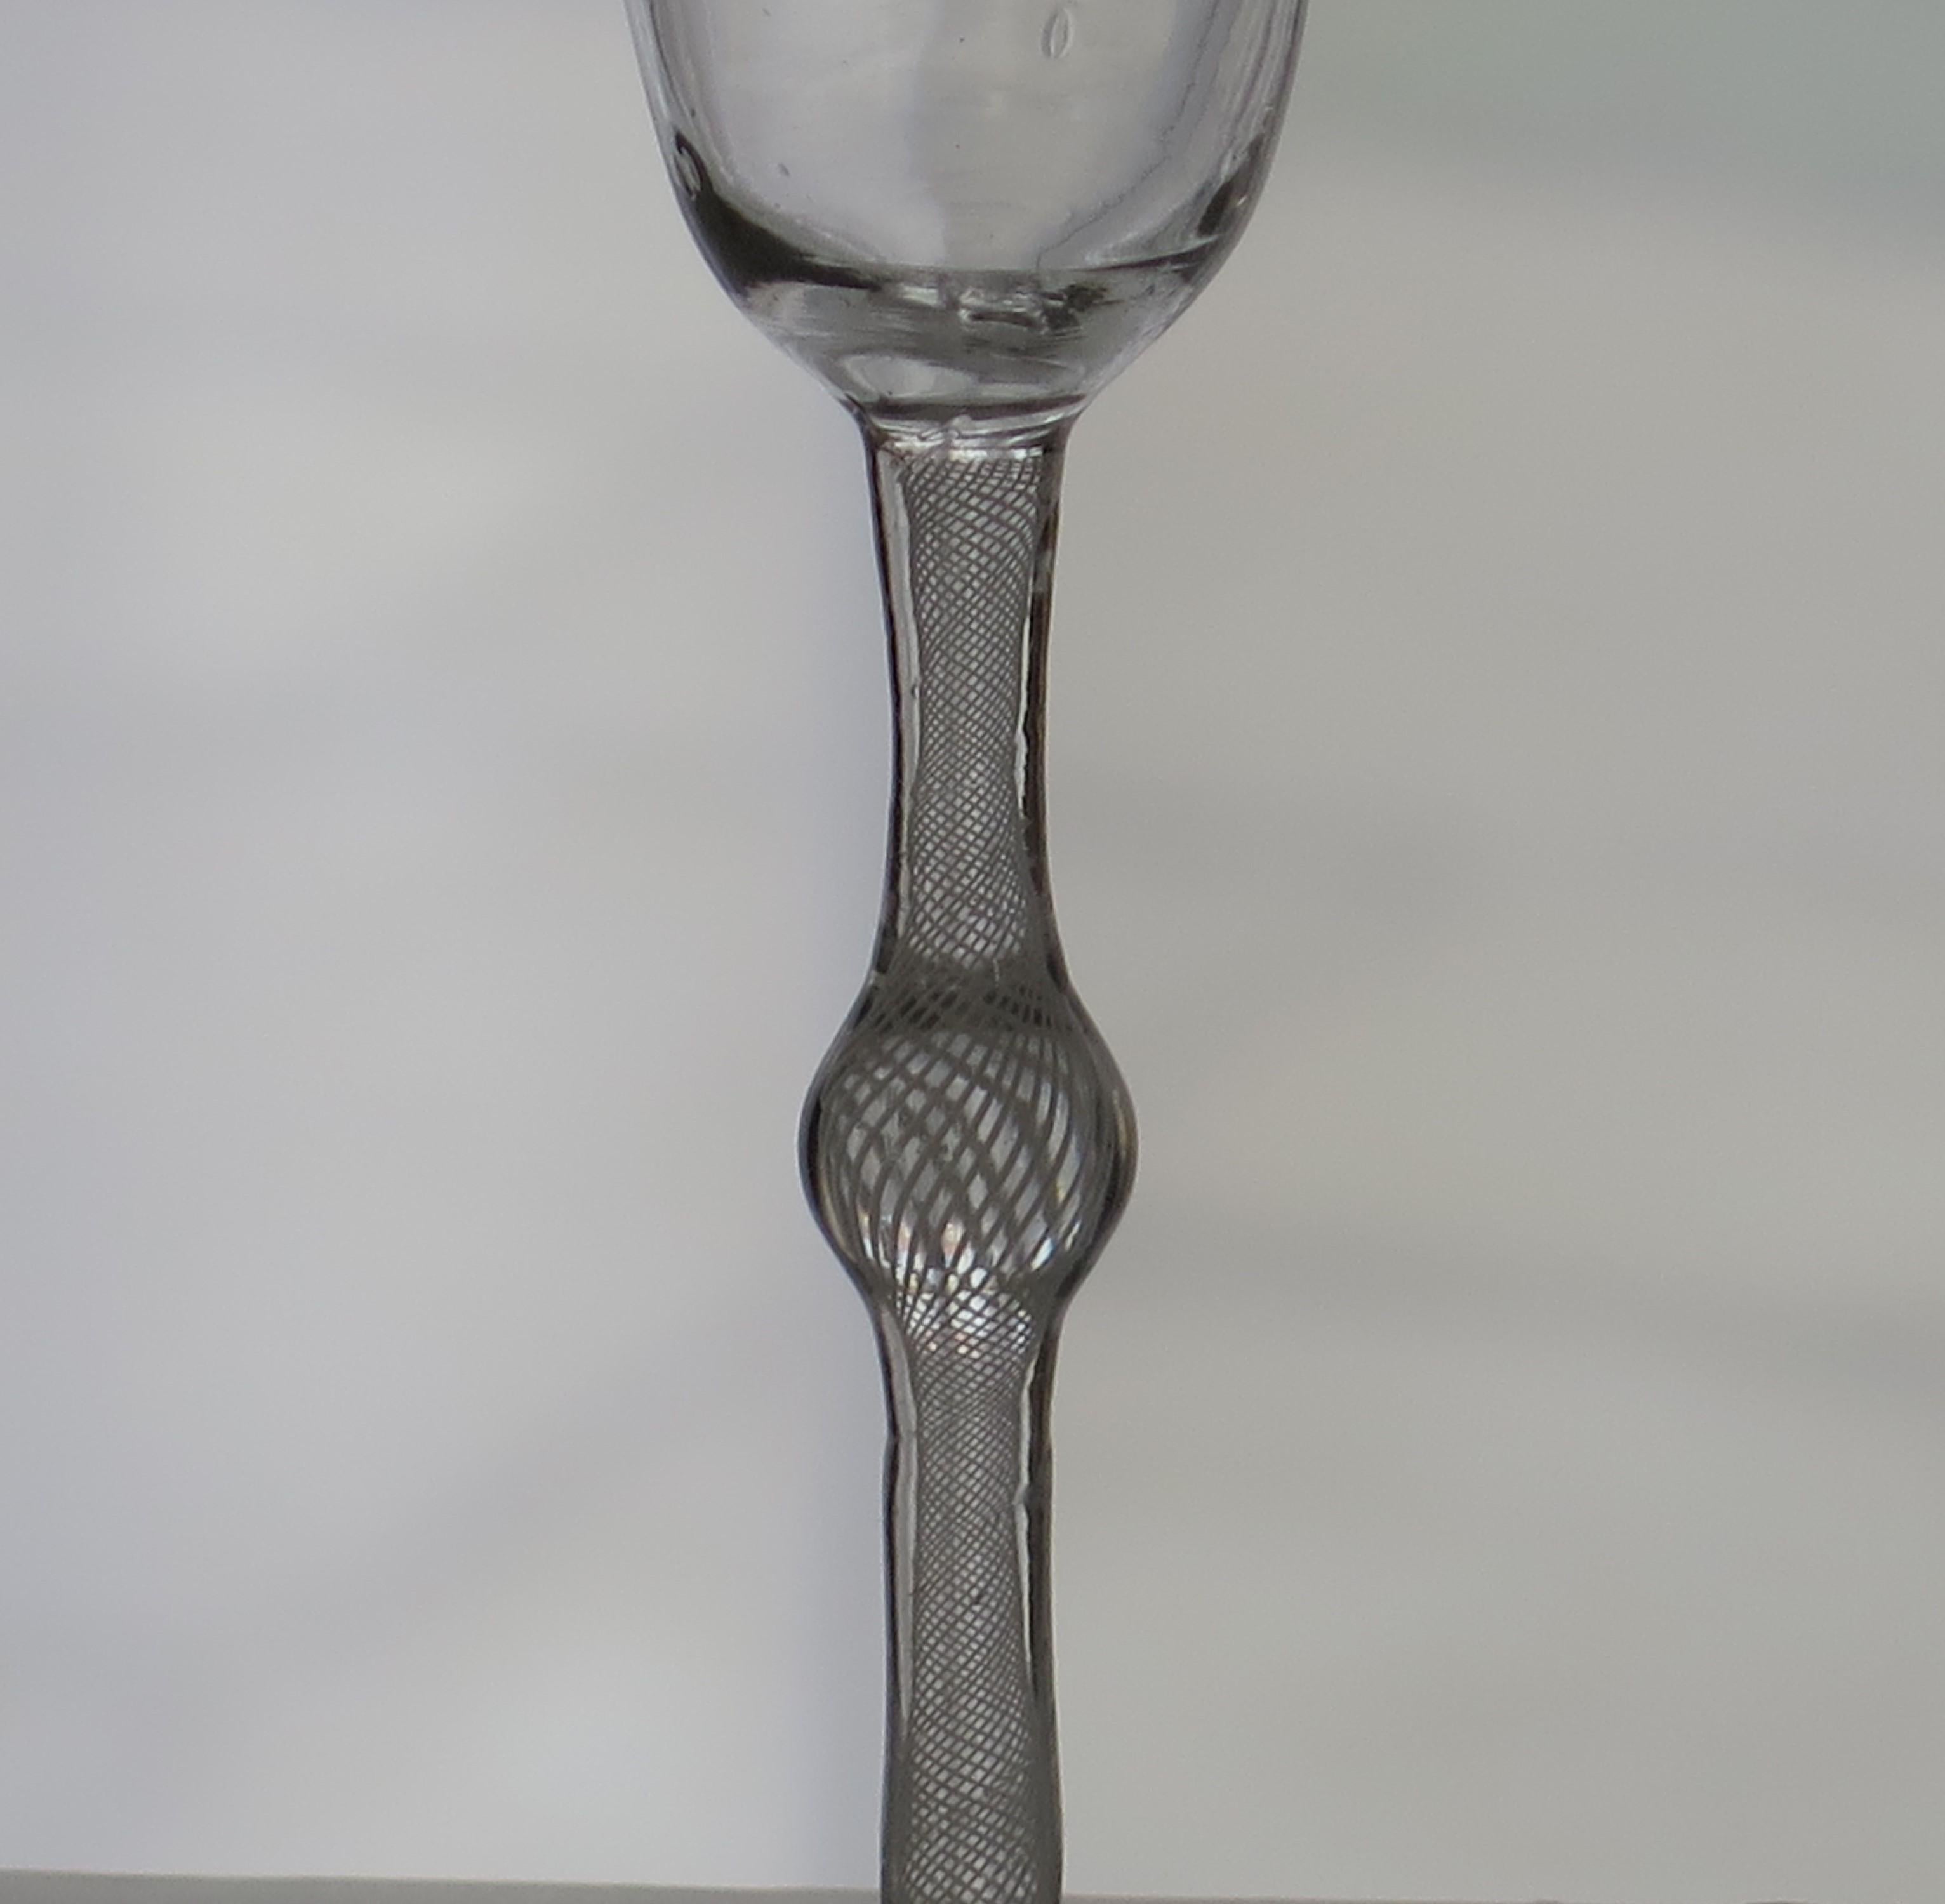 cordial glasses with stem